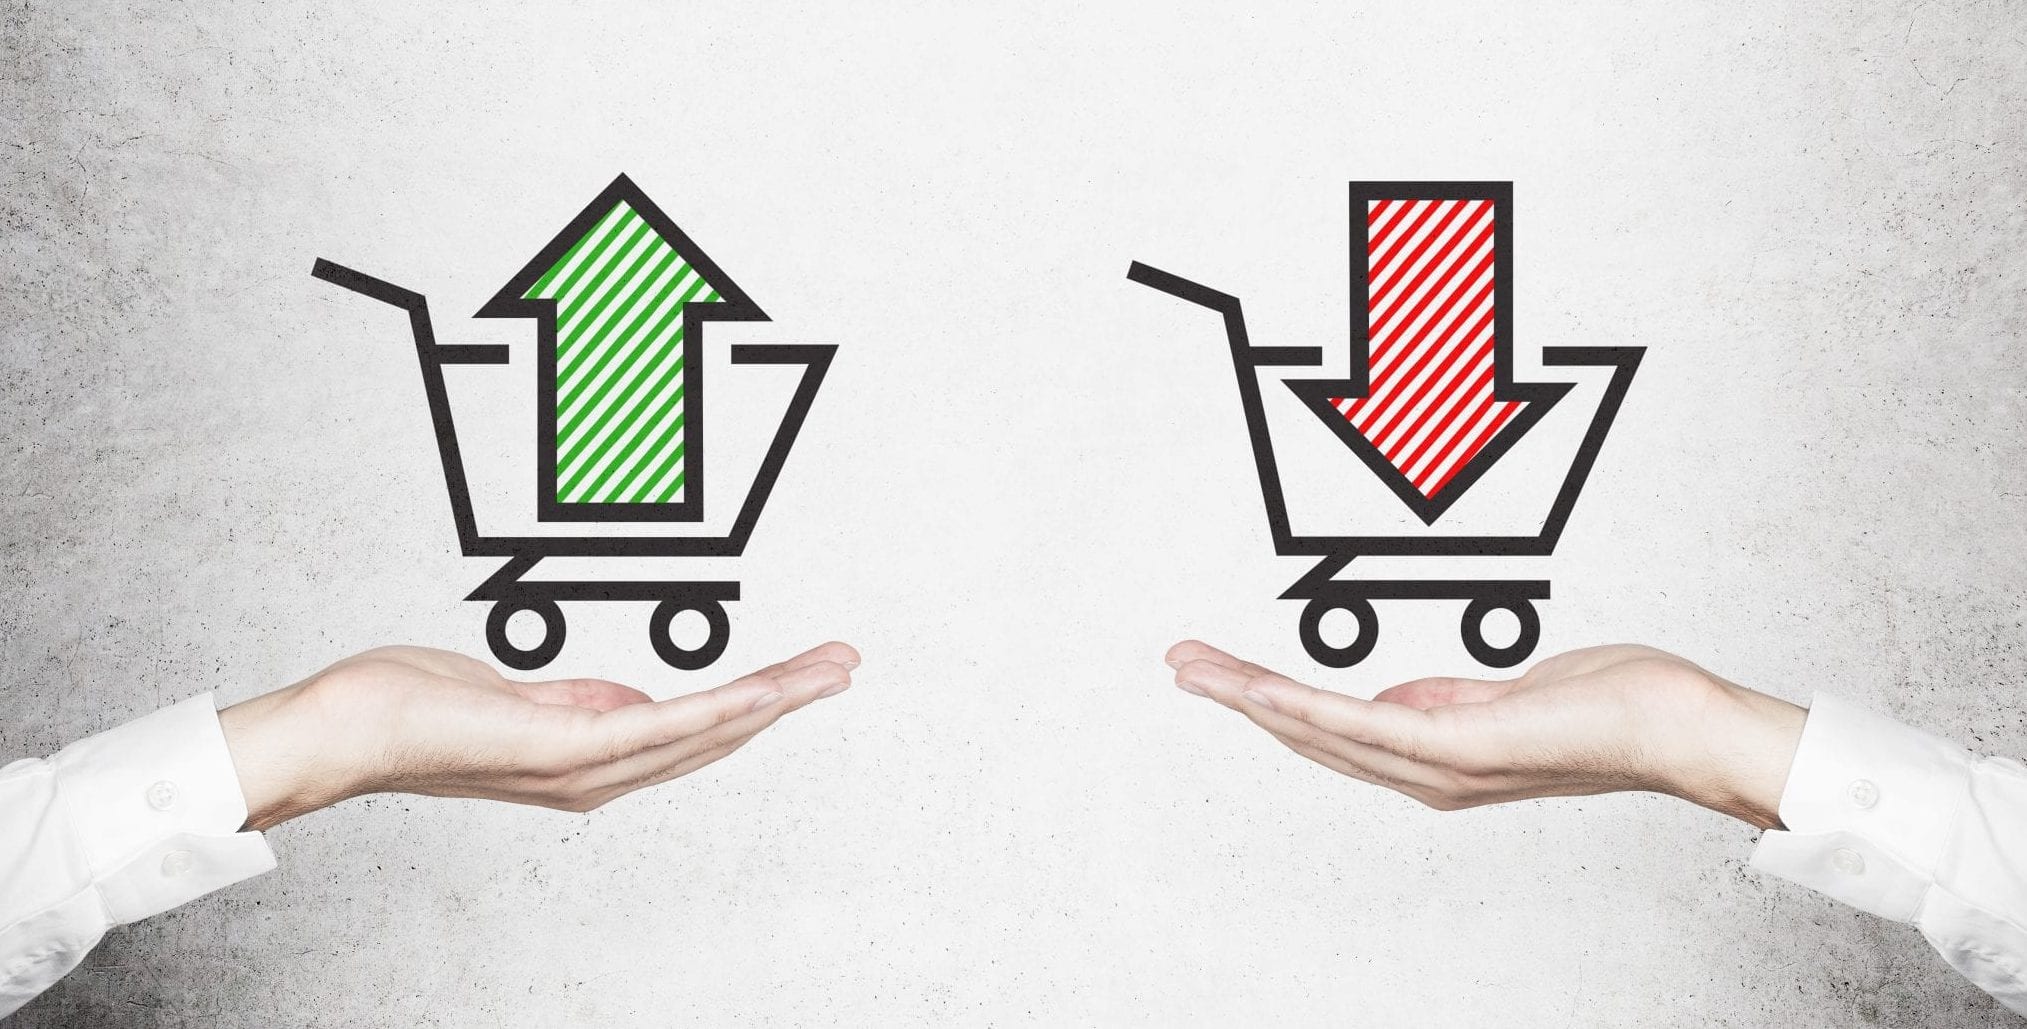 Green up arrow in cart and red down arrow in cart to represent buyer's and seller's market